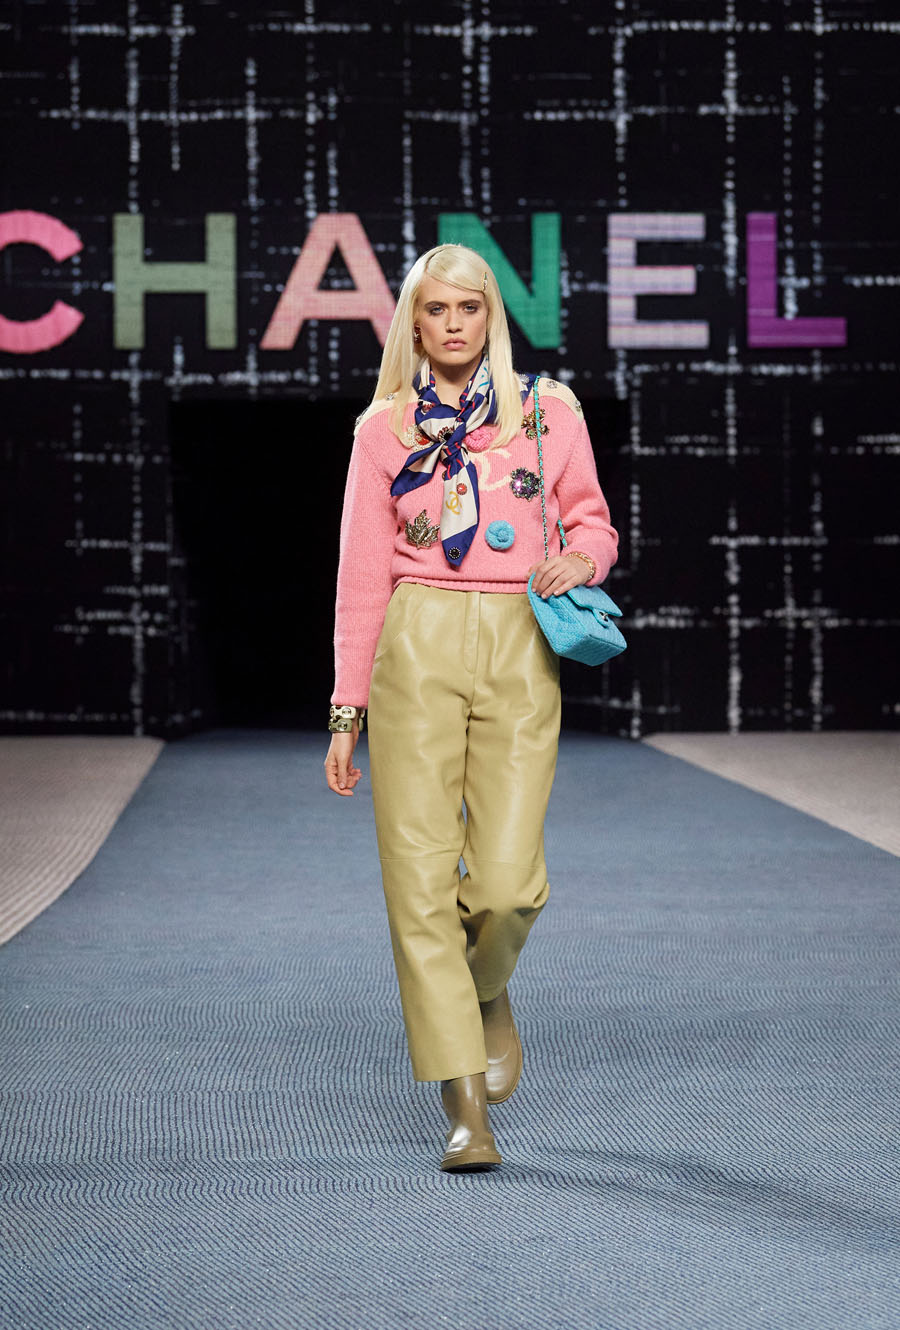 CHANEL Fall-Winter 2022/23 Ready-to-Wear collection - Time